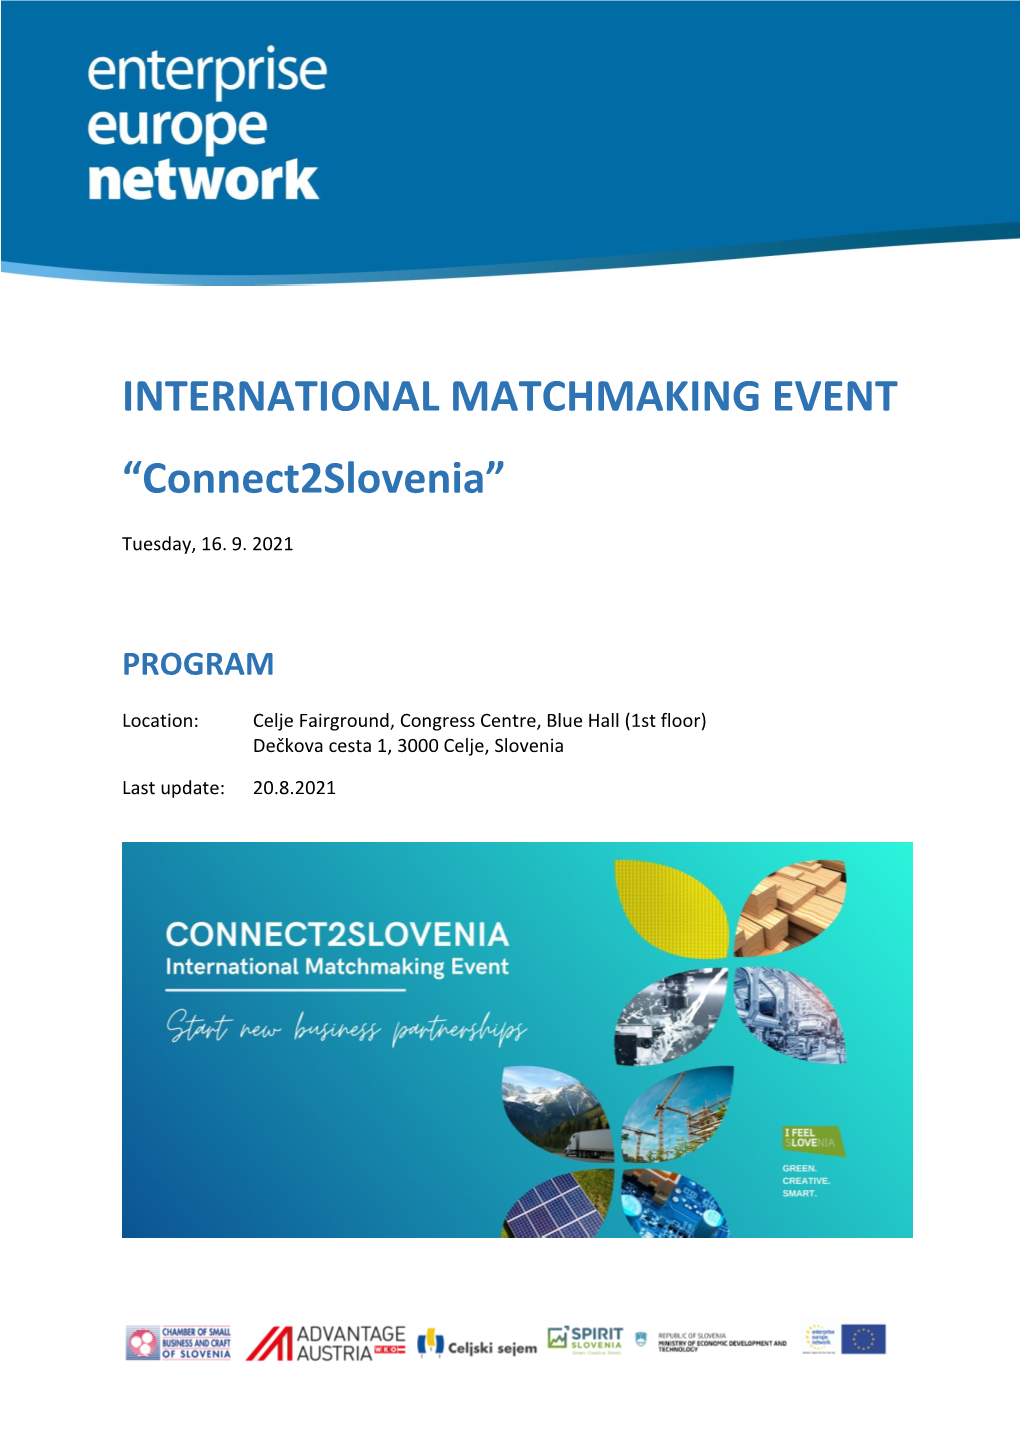 INTERNATIONAL MATCHMAKING EVENT “Connect2slovenia”